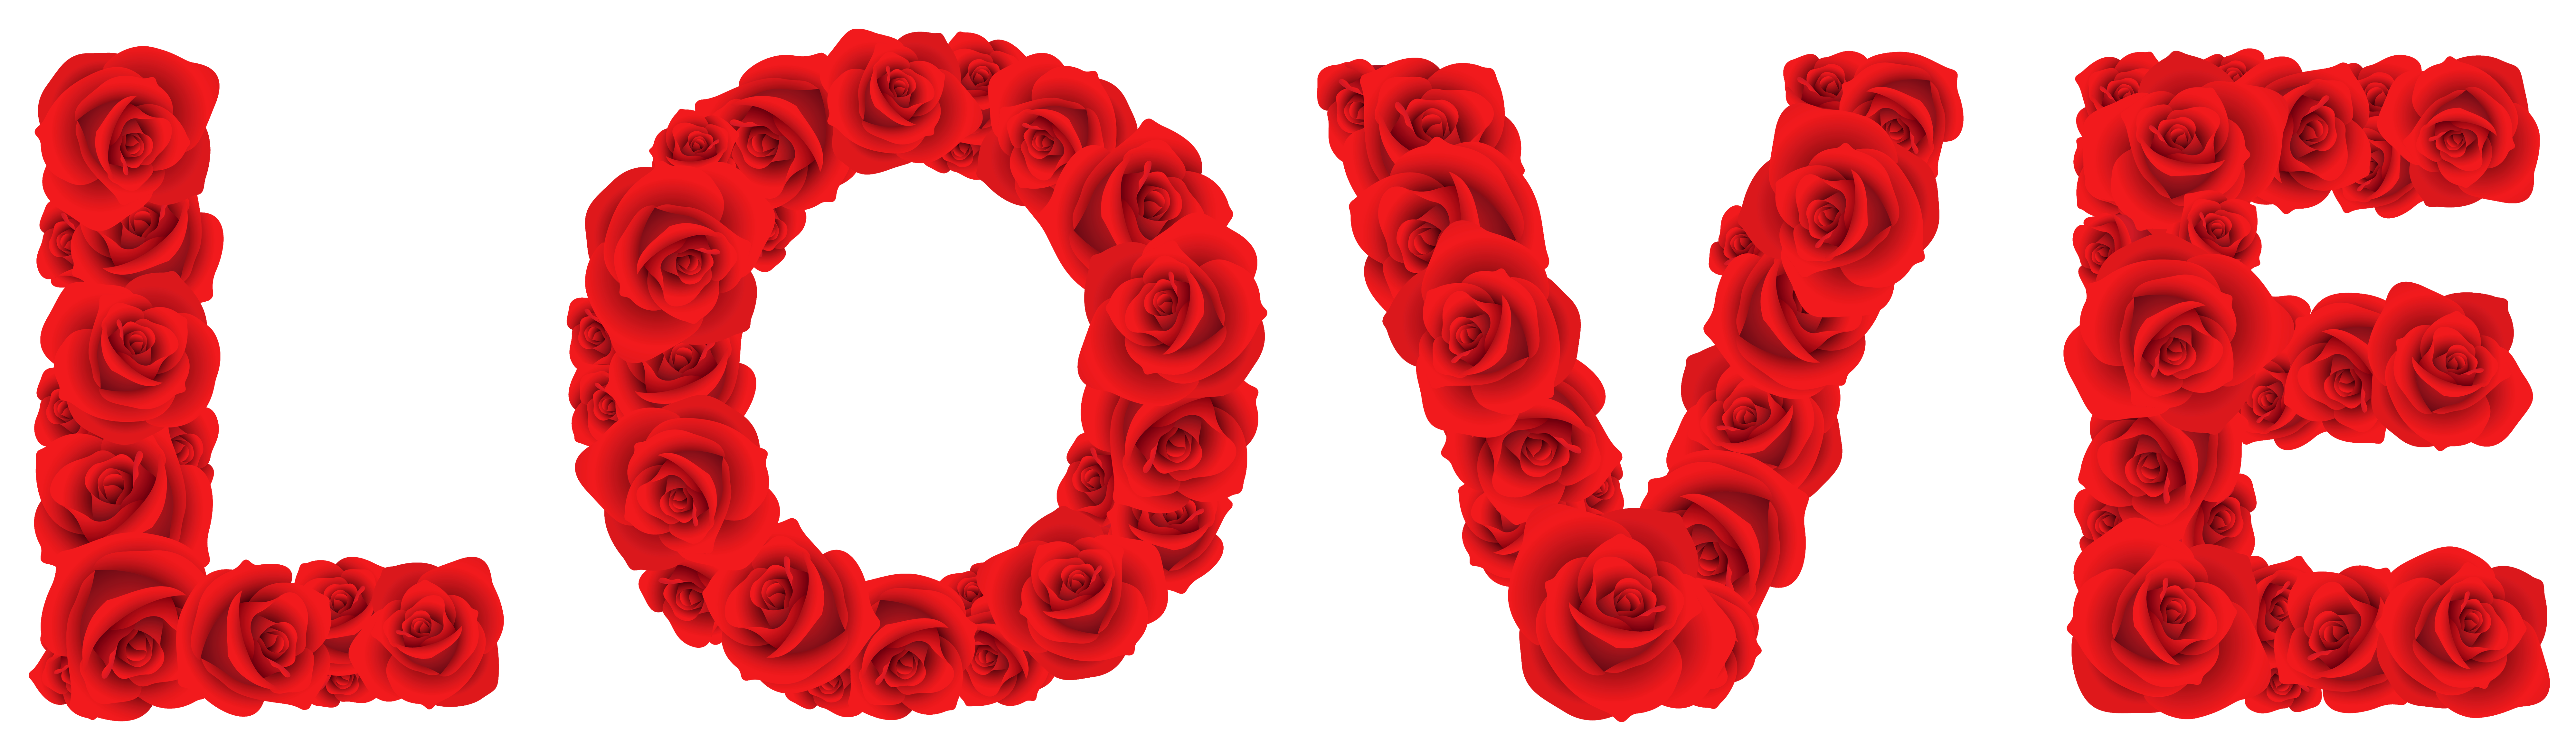 Love of roses png. Clipart family transparent background